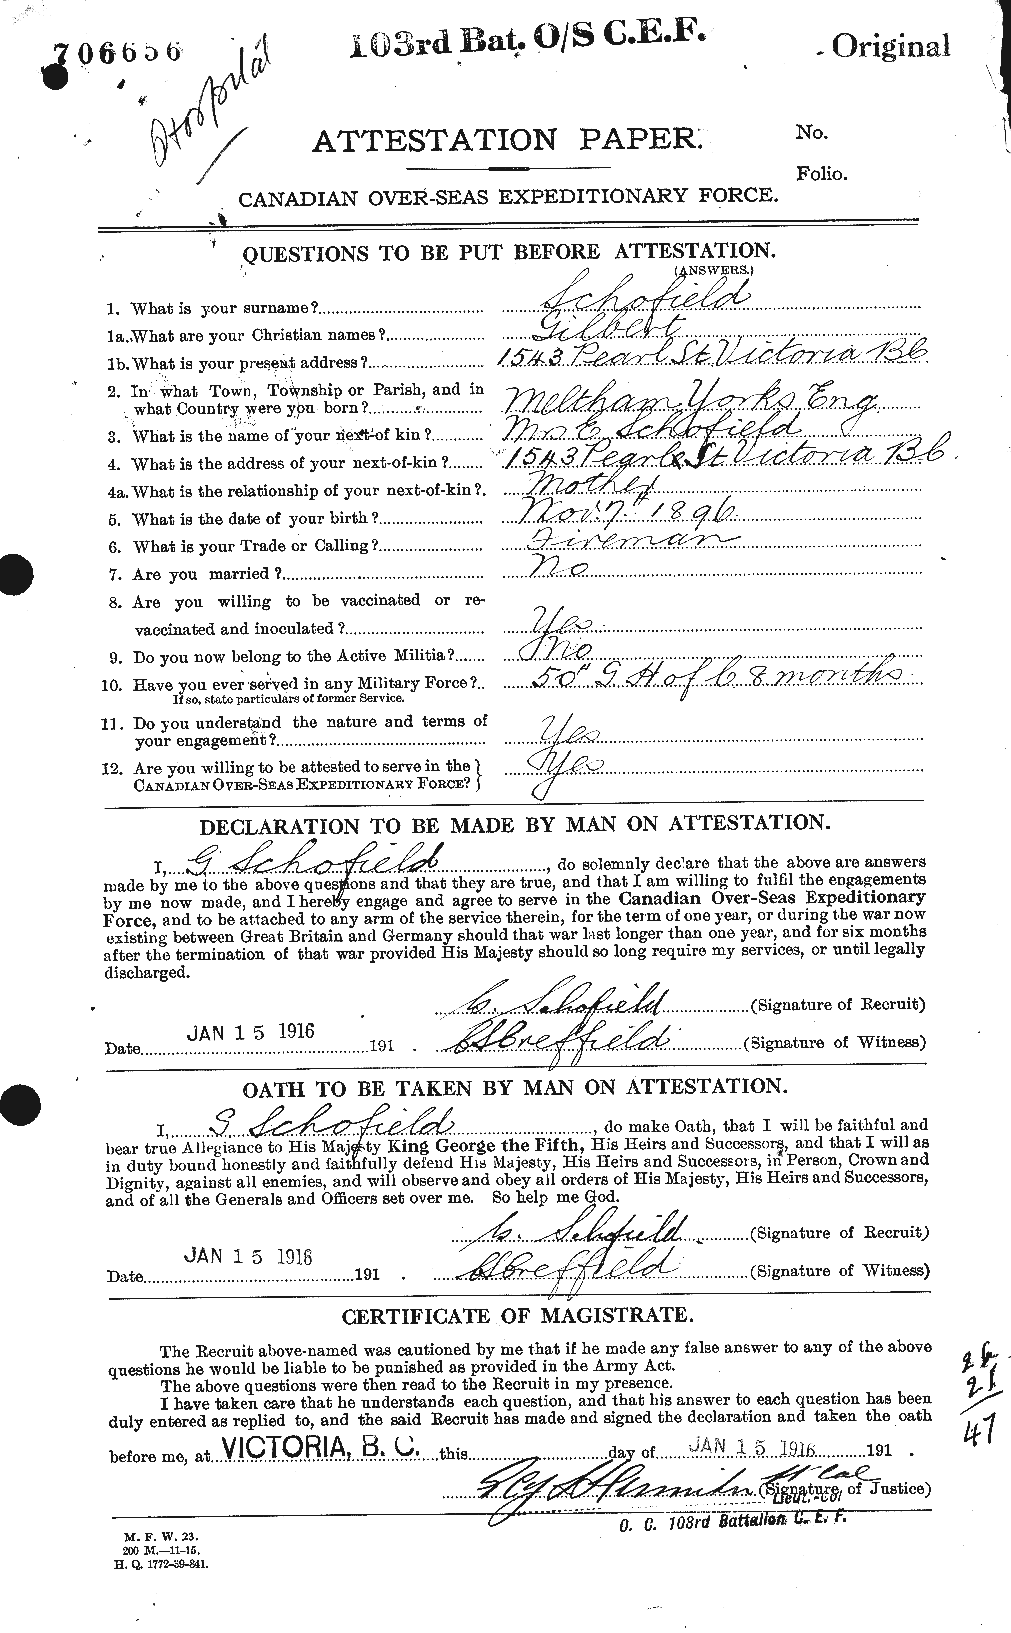 Personnel Records of the First World War - CEF 082190a